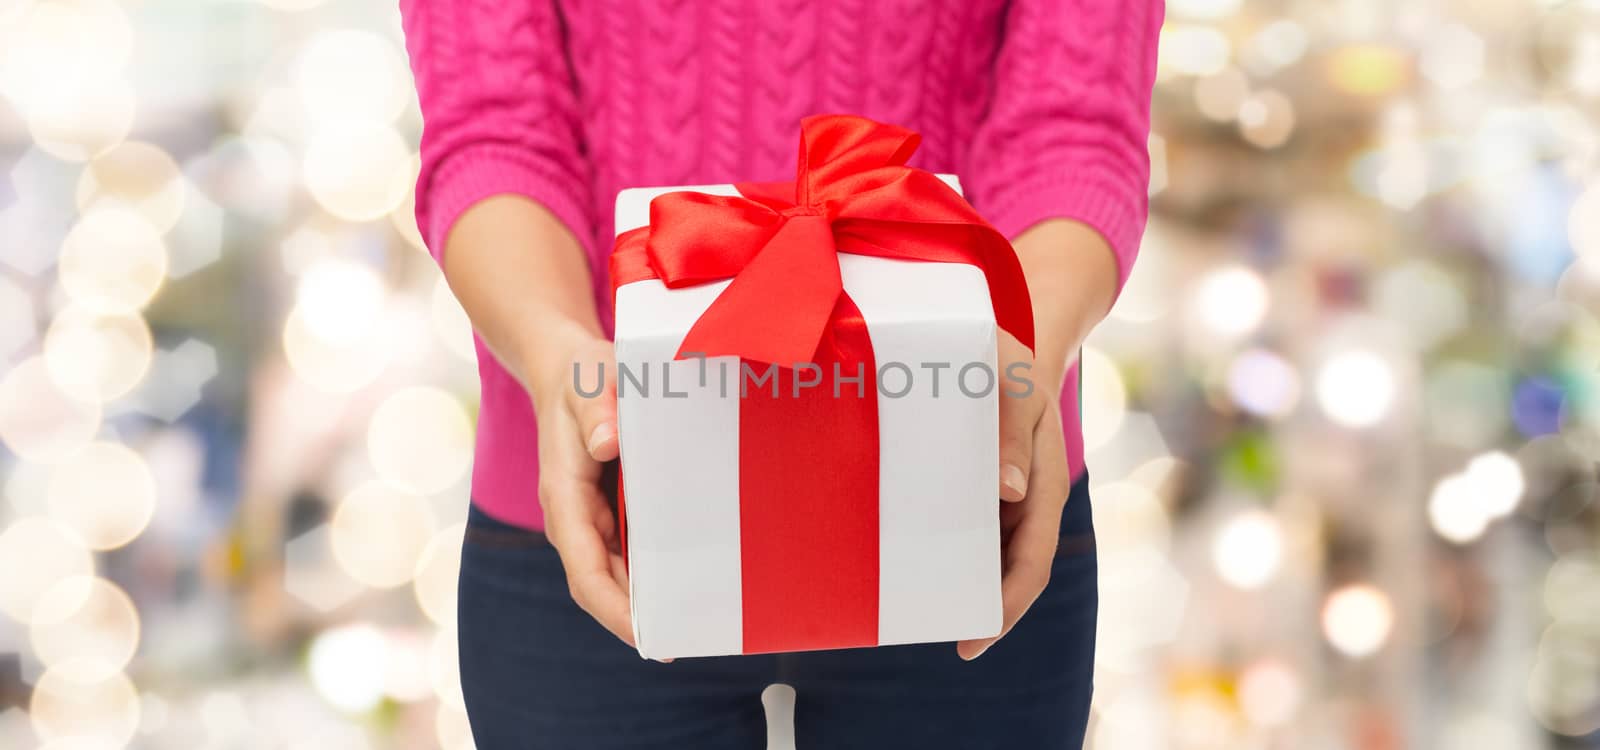 christmas, holidays and people concept - close up of woman in pink sweater holding gift box over lights background